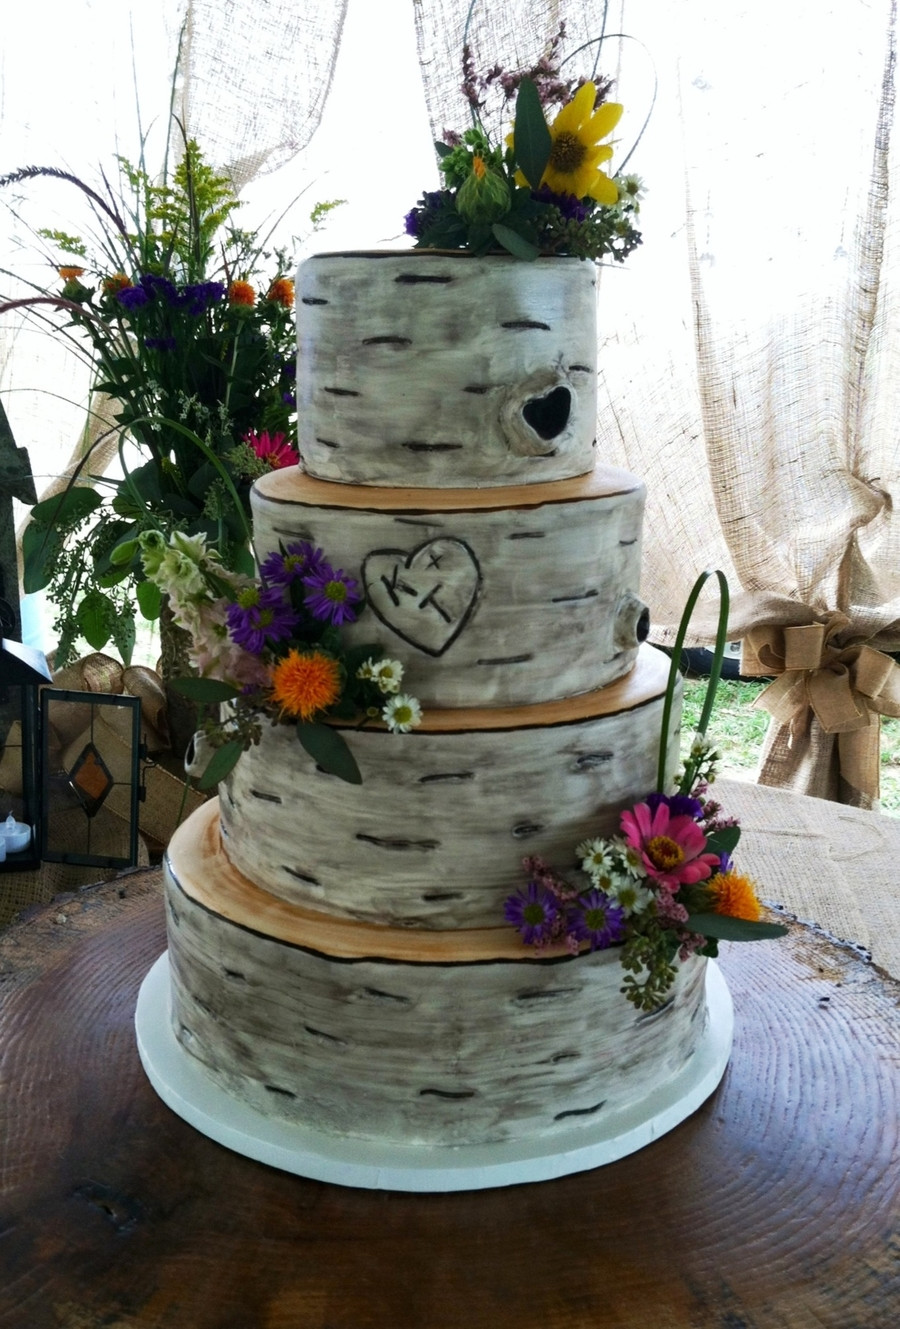 Birch Tree Wedding Cake
 Birch Tree Wedding Cake CakeCentral